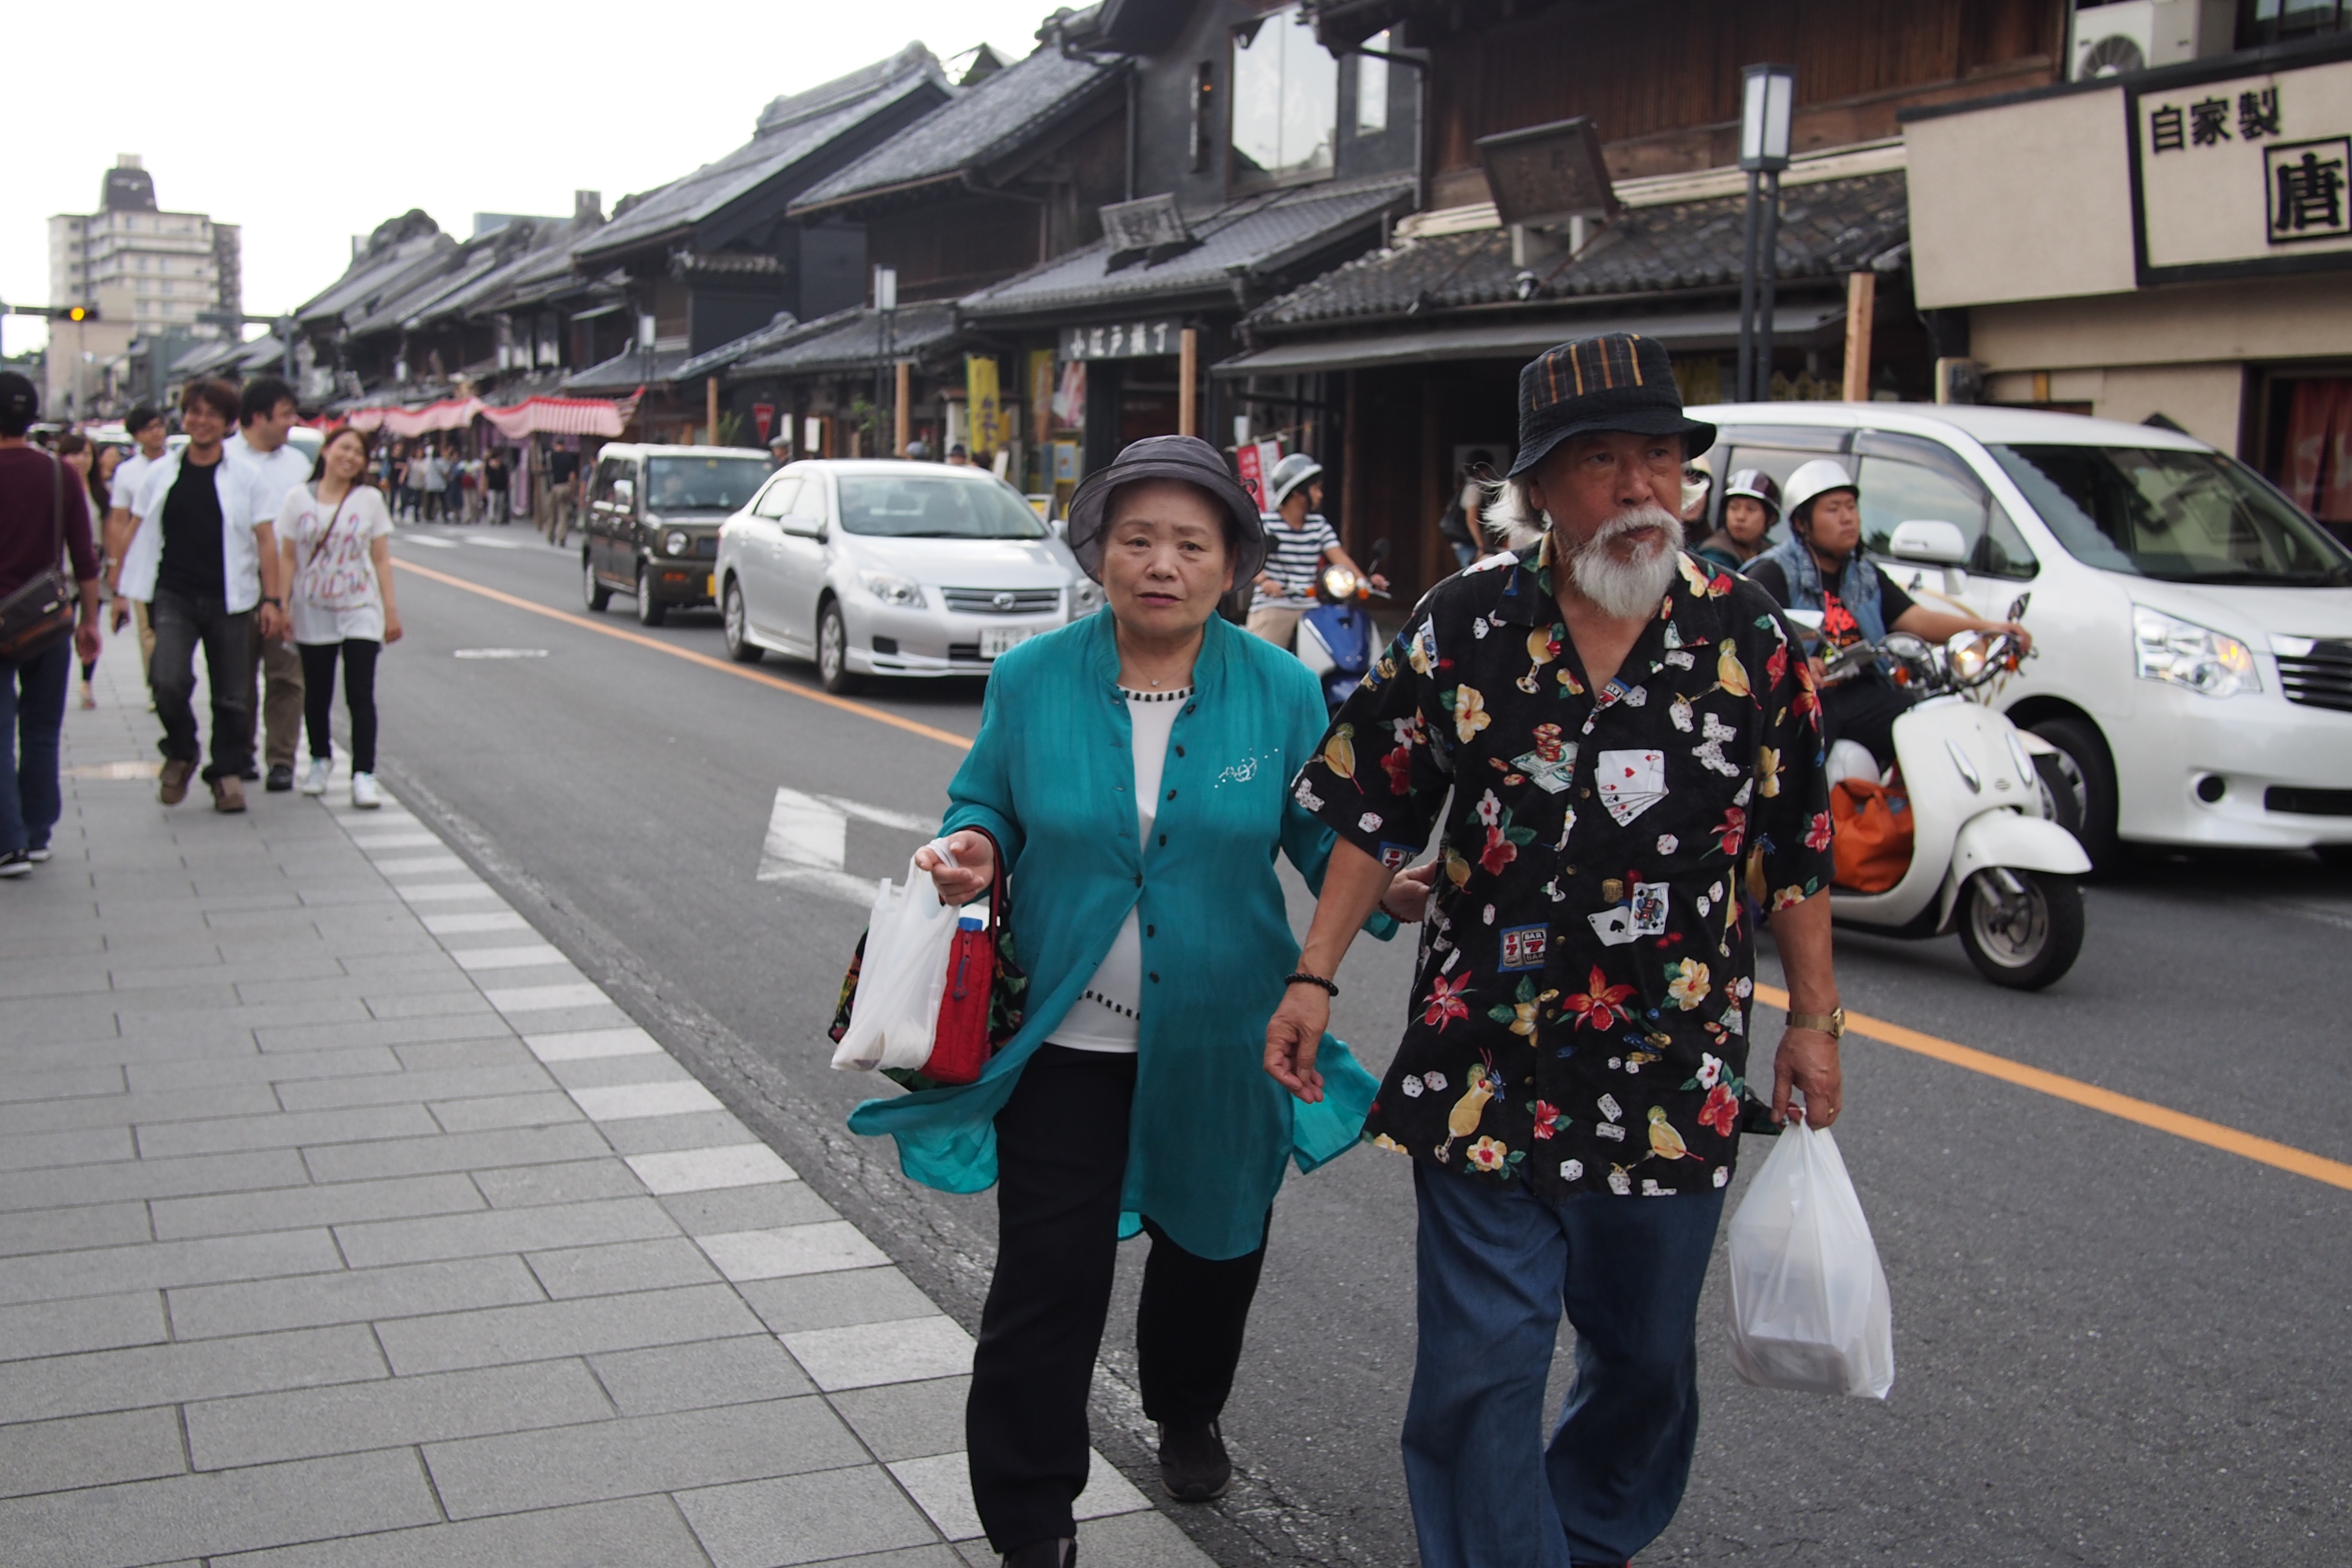 A Perfect Unplanned Day Trip to Kawagoe Japan